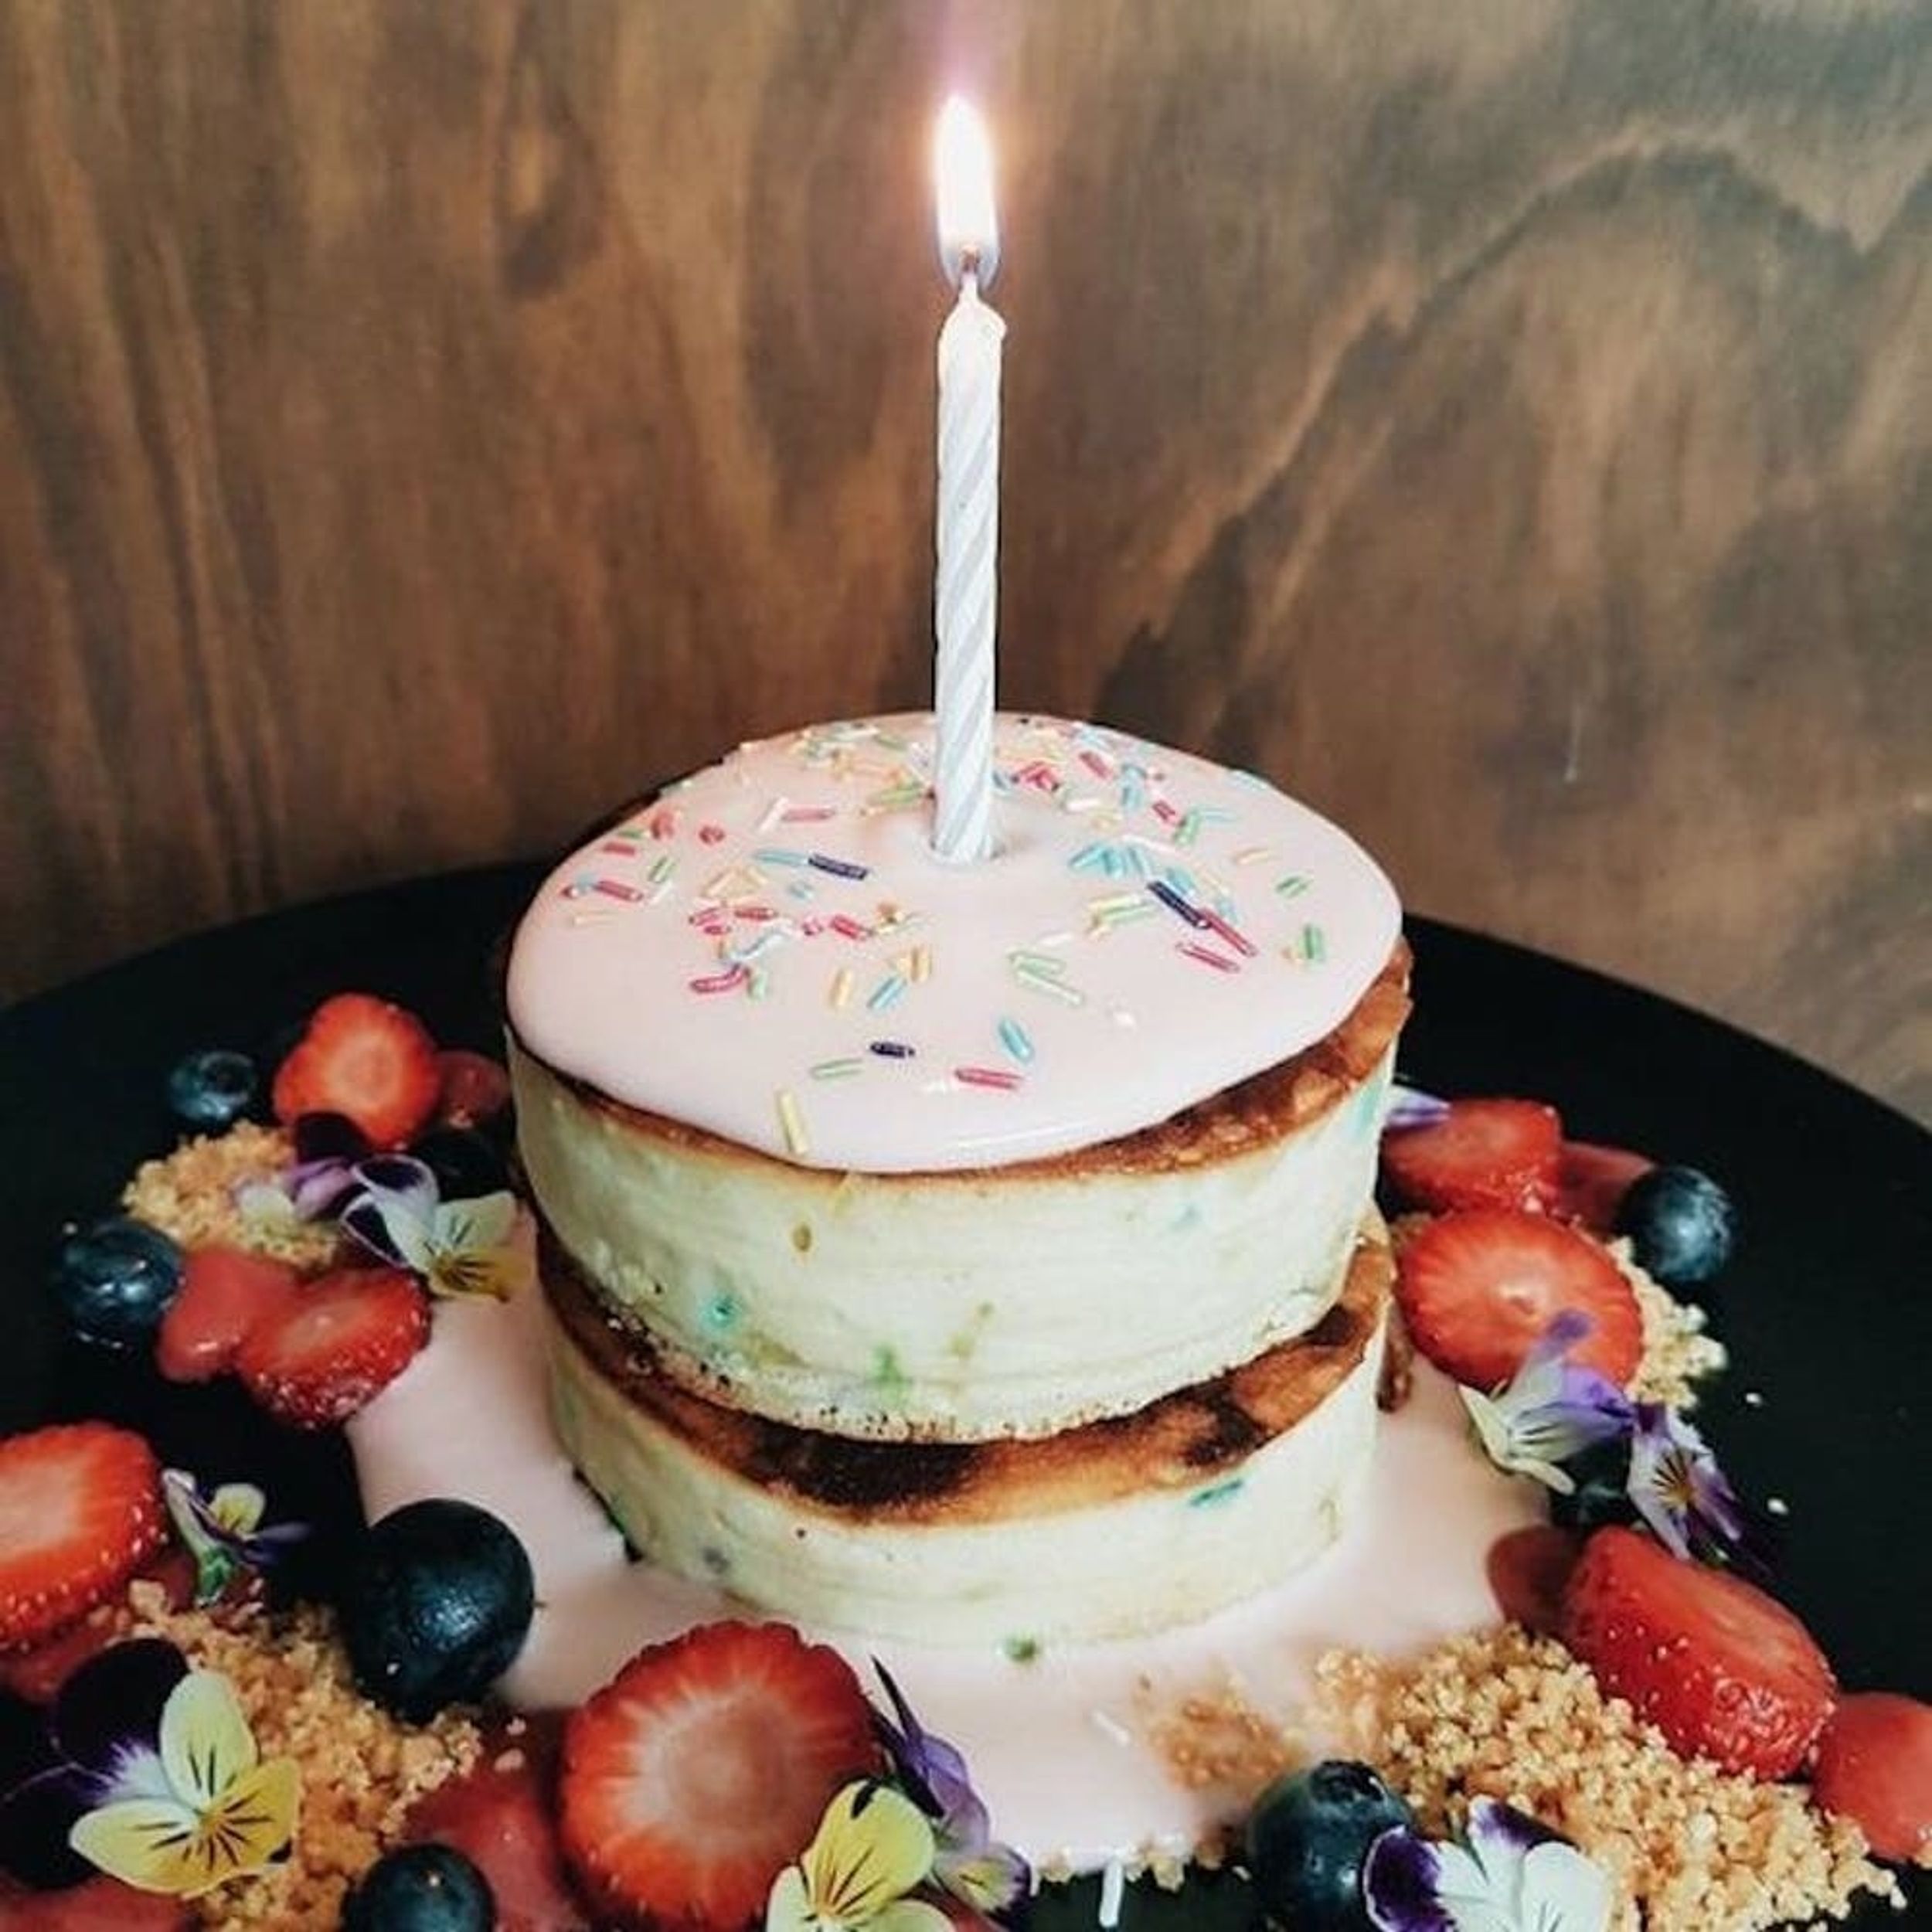 Japanese Pancakes Will Be Your New Fave Food to Drool Over on Instagram